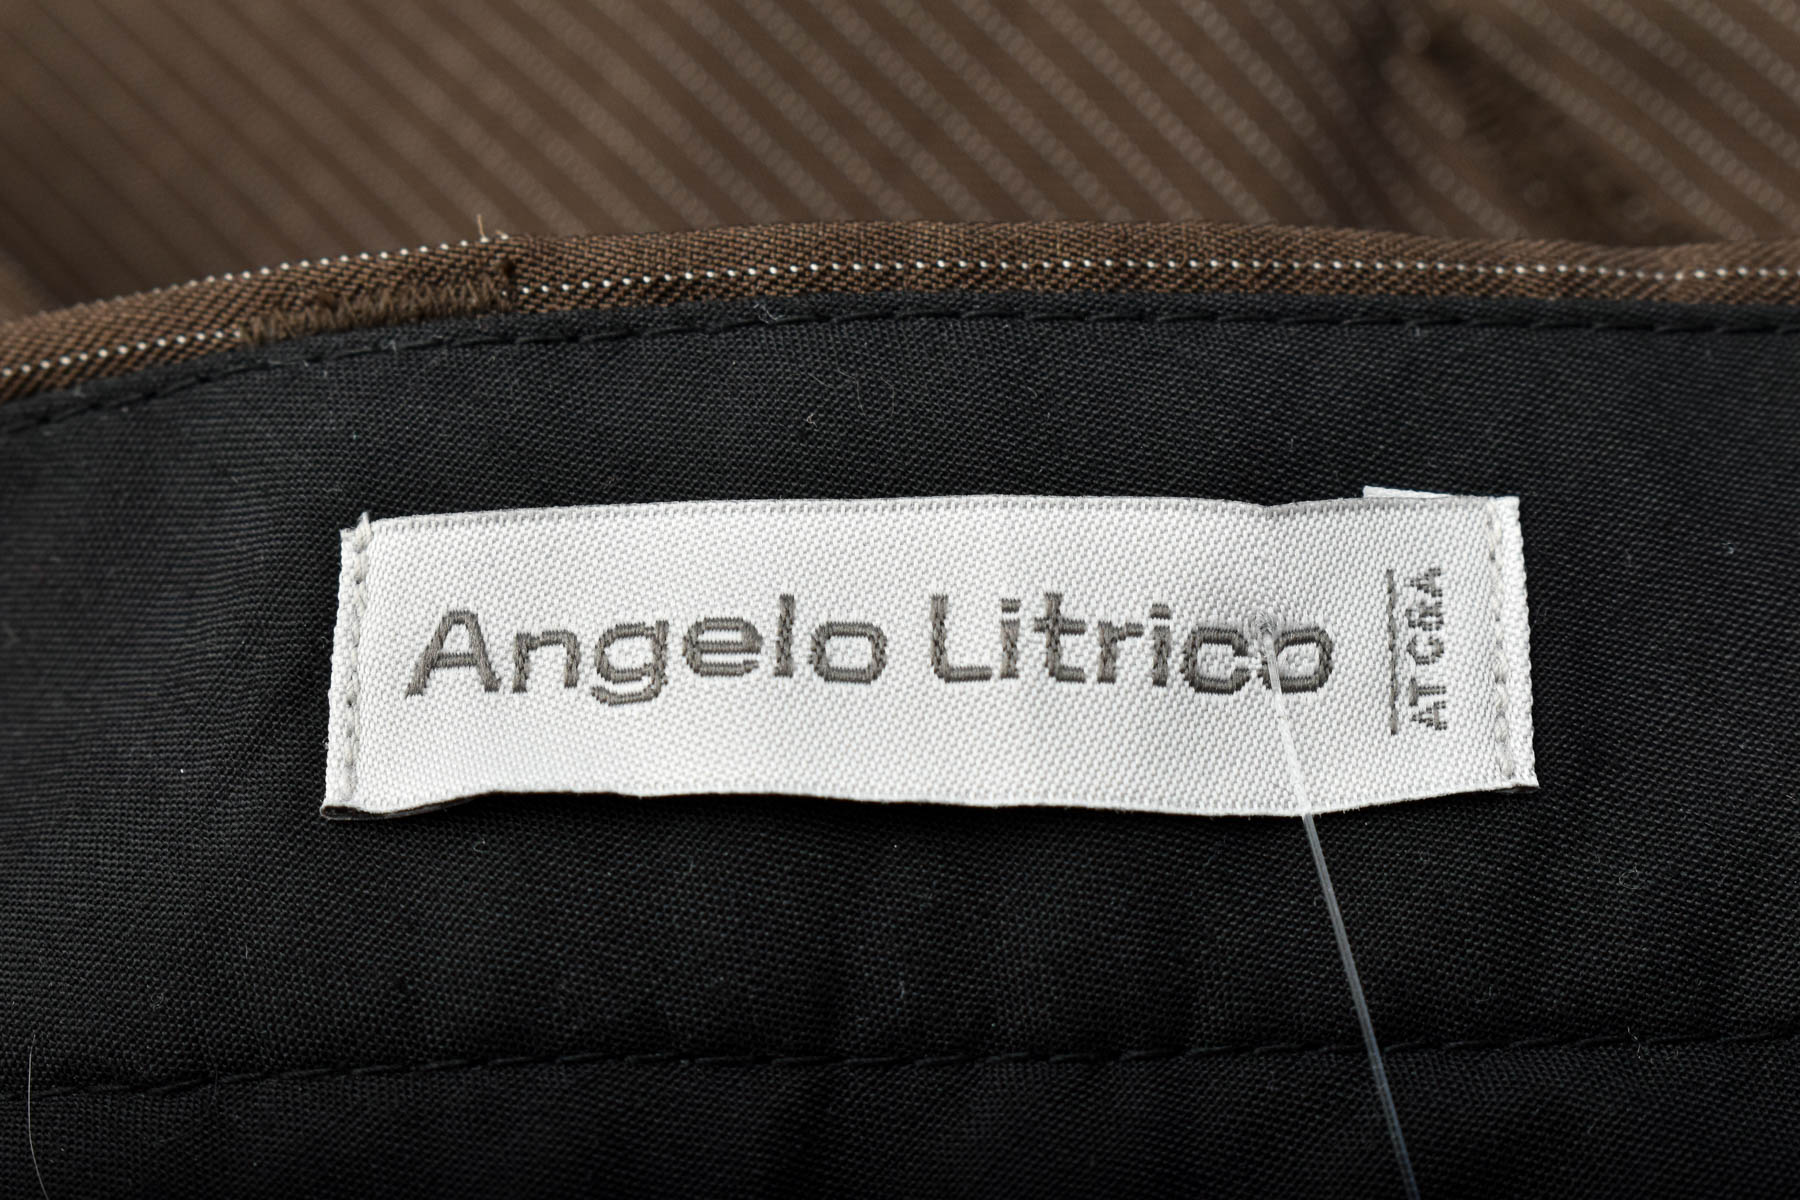 Men's trousers - Angelo Litrico - 2